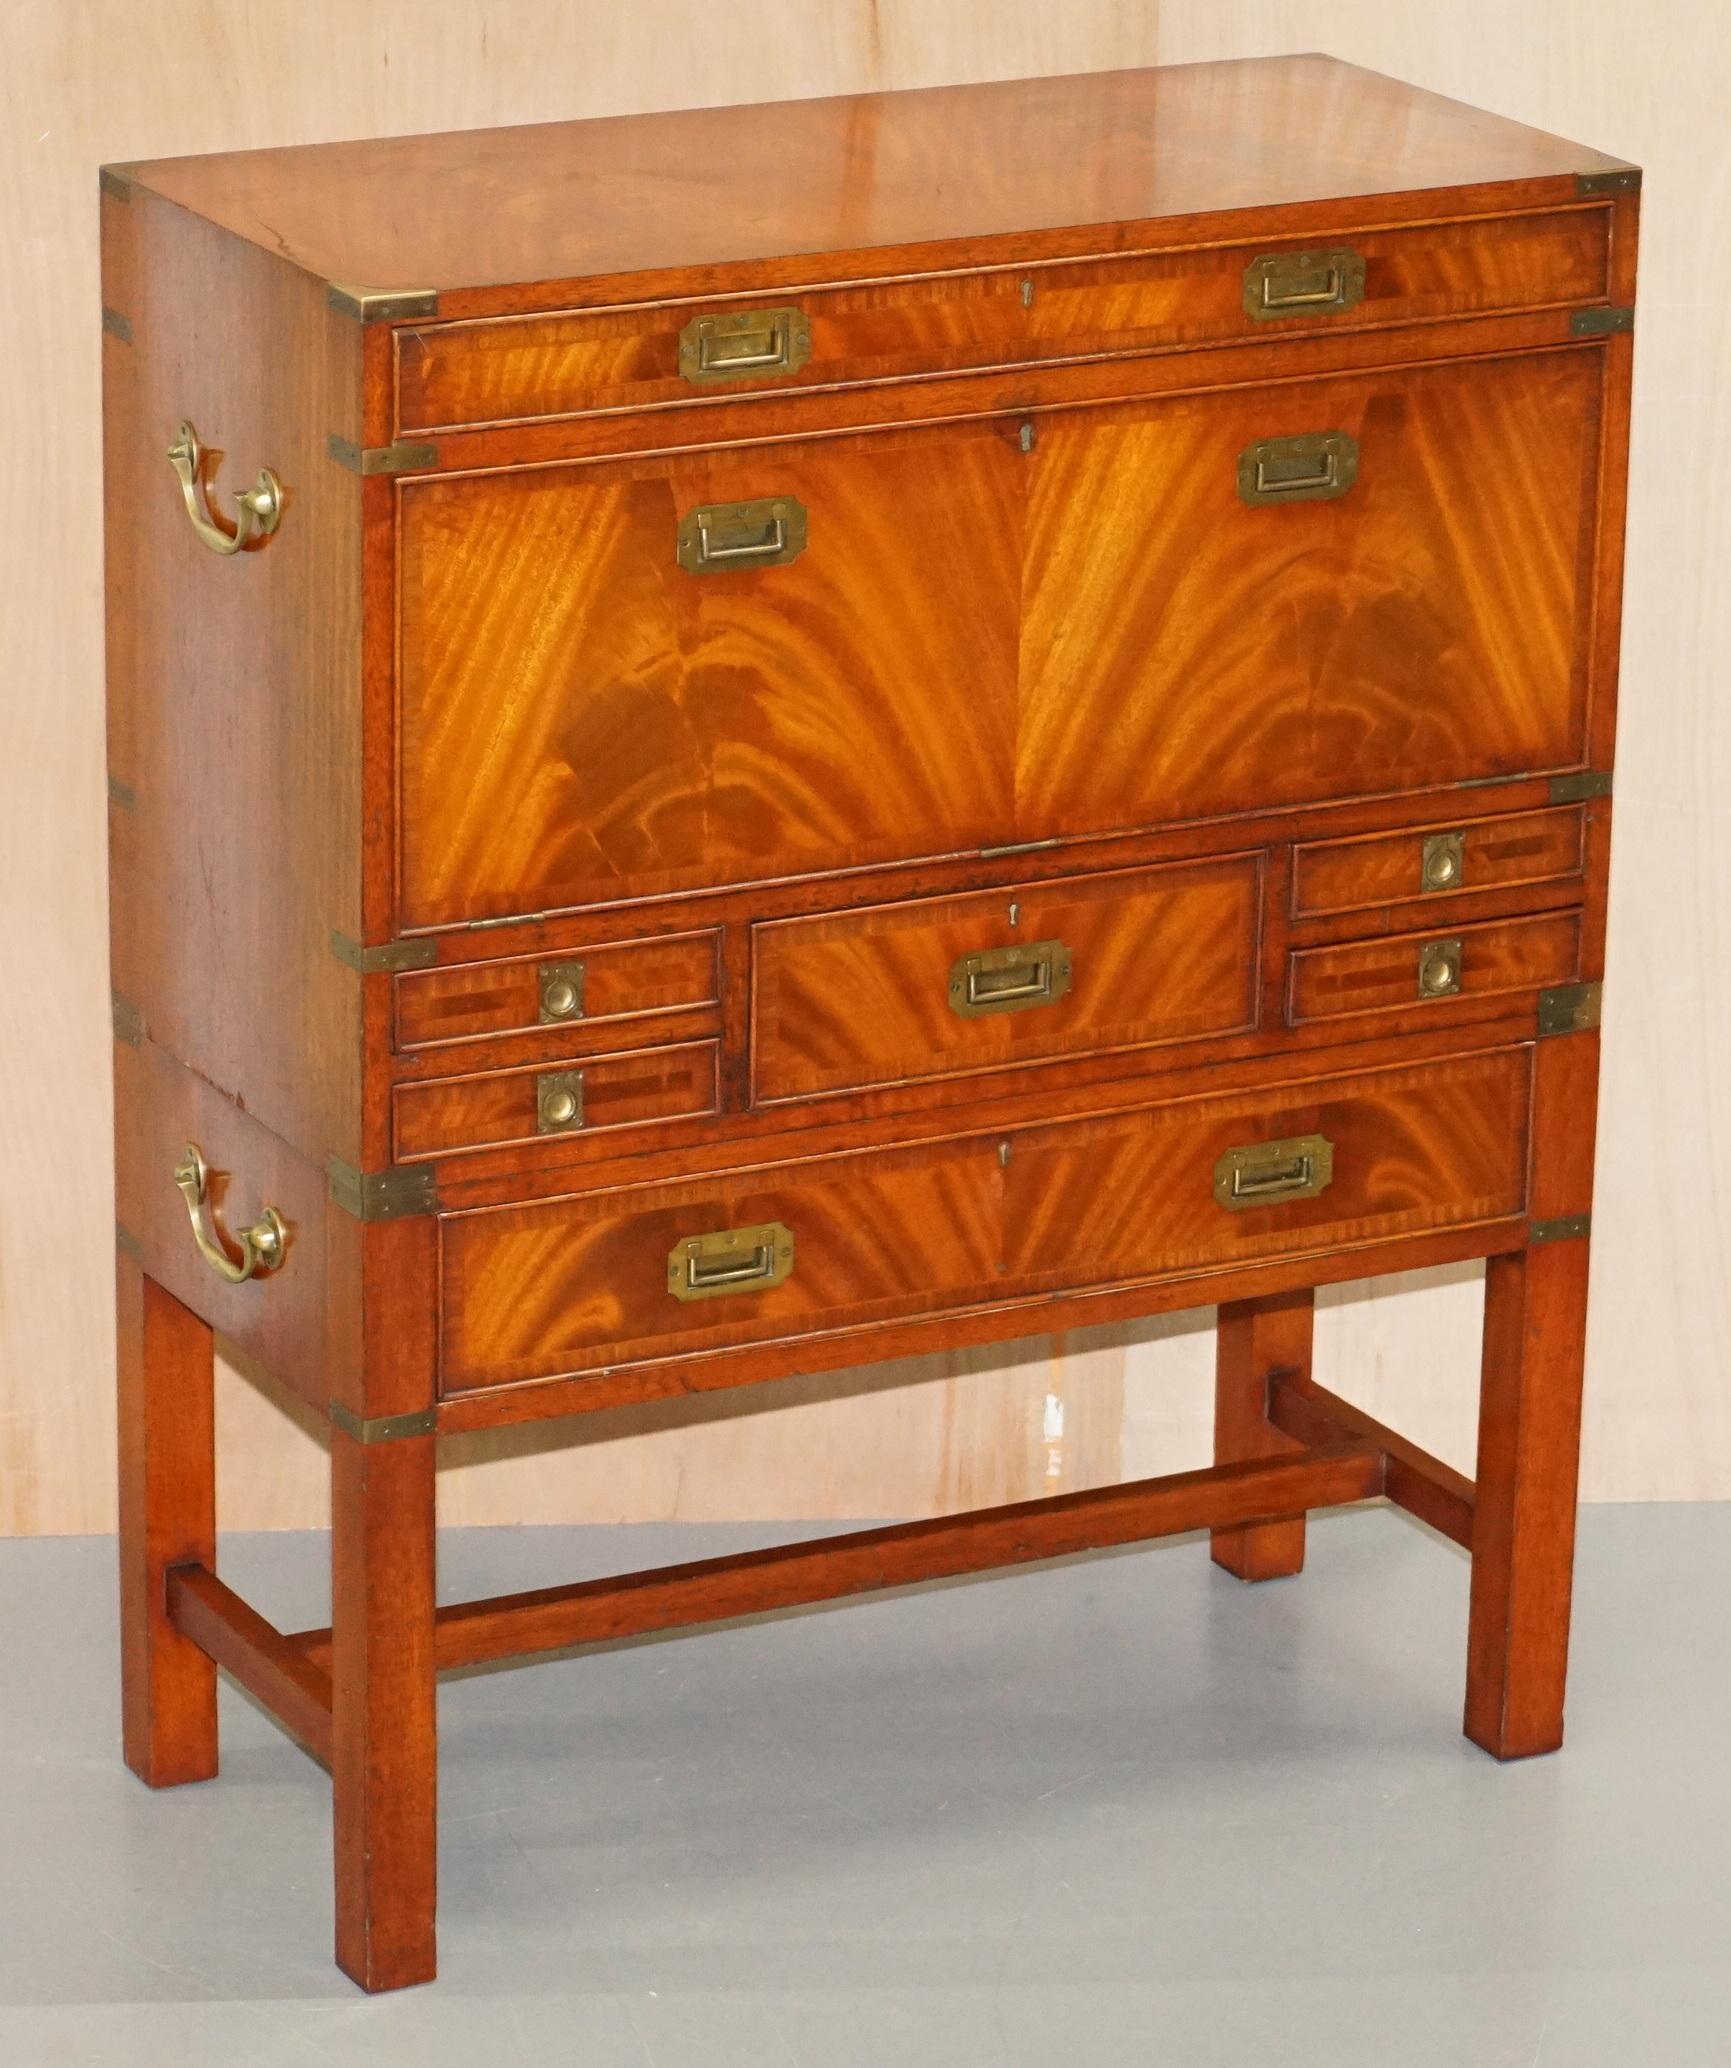 We are delighted to offer for sale this lovely vintage flamed mahogany Military Campaign chest of drawers with drop front desk

A very high quality piece in excellent lightly restored condition throughout, the Campaign chest sits on top of a